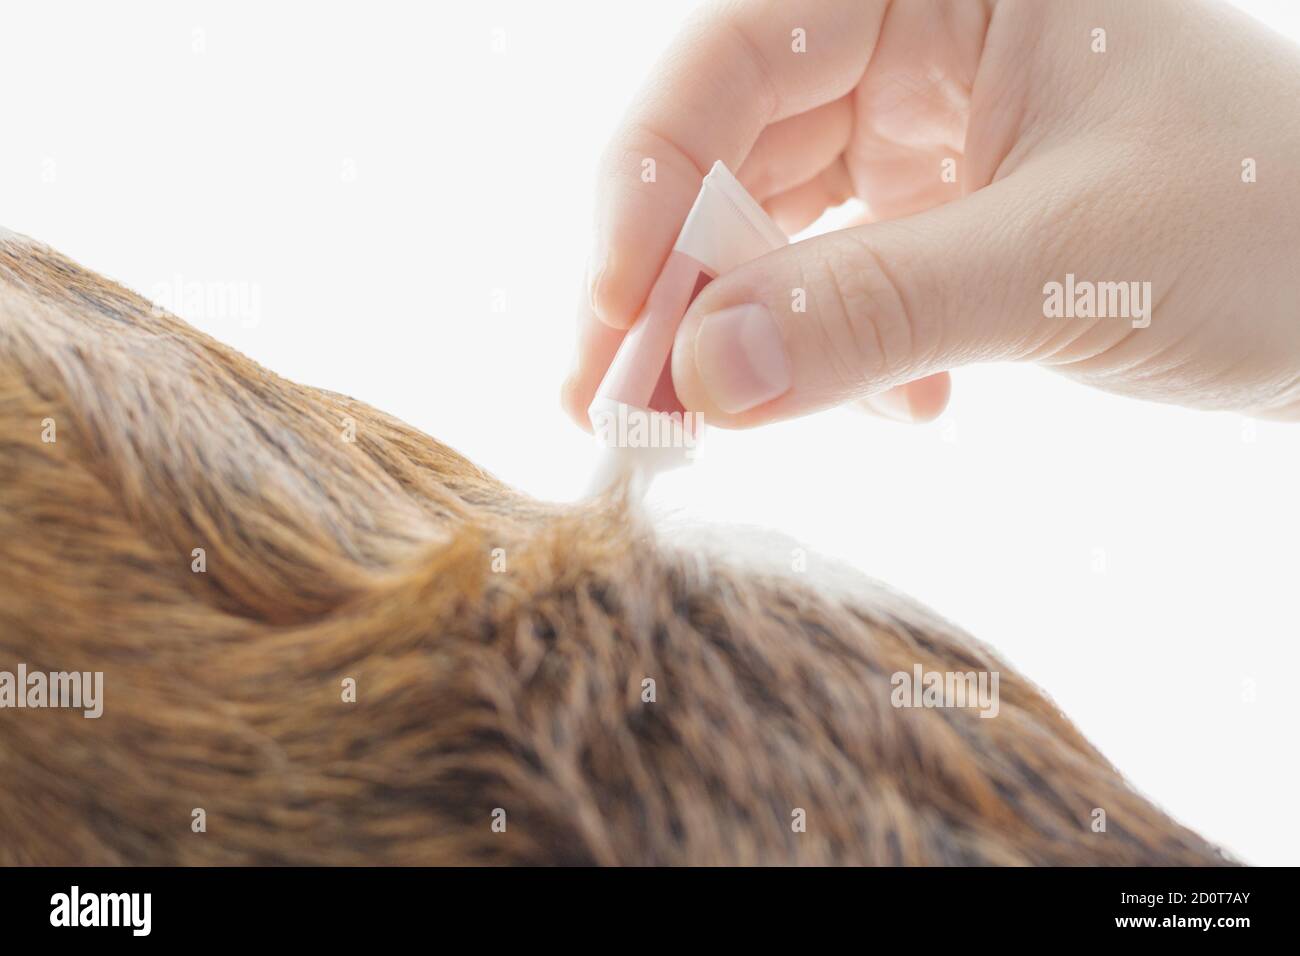 Woman's hand using pipette on dog's hair as protection against diseases Stock Photo